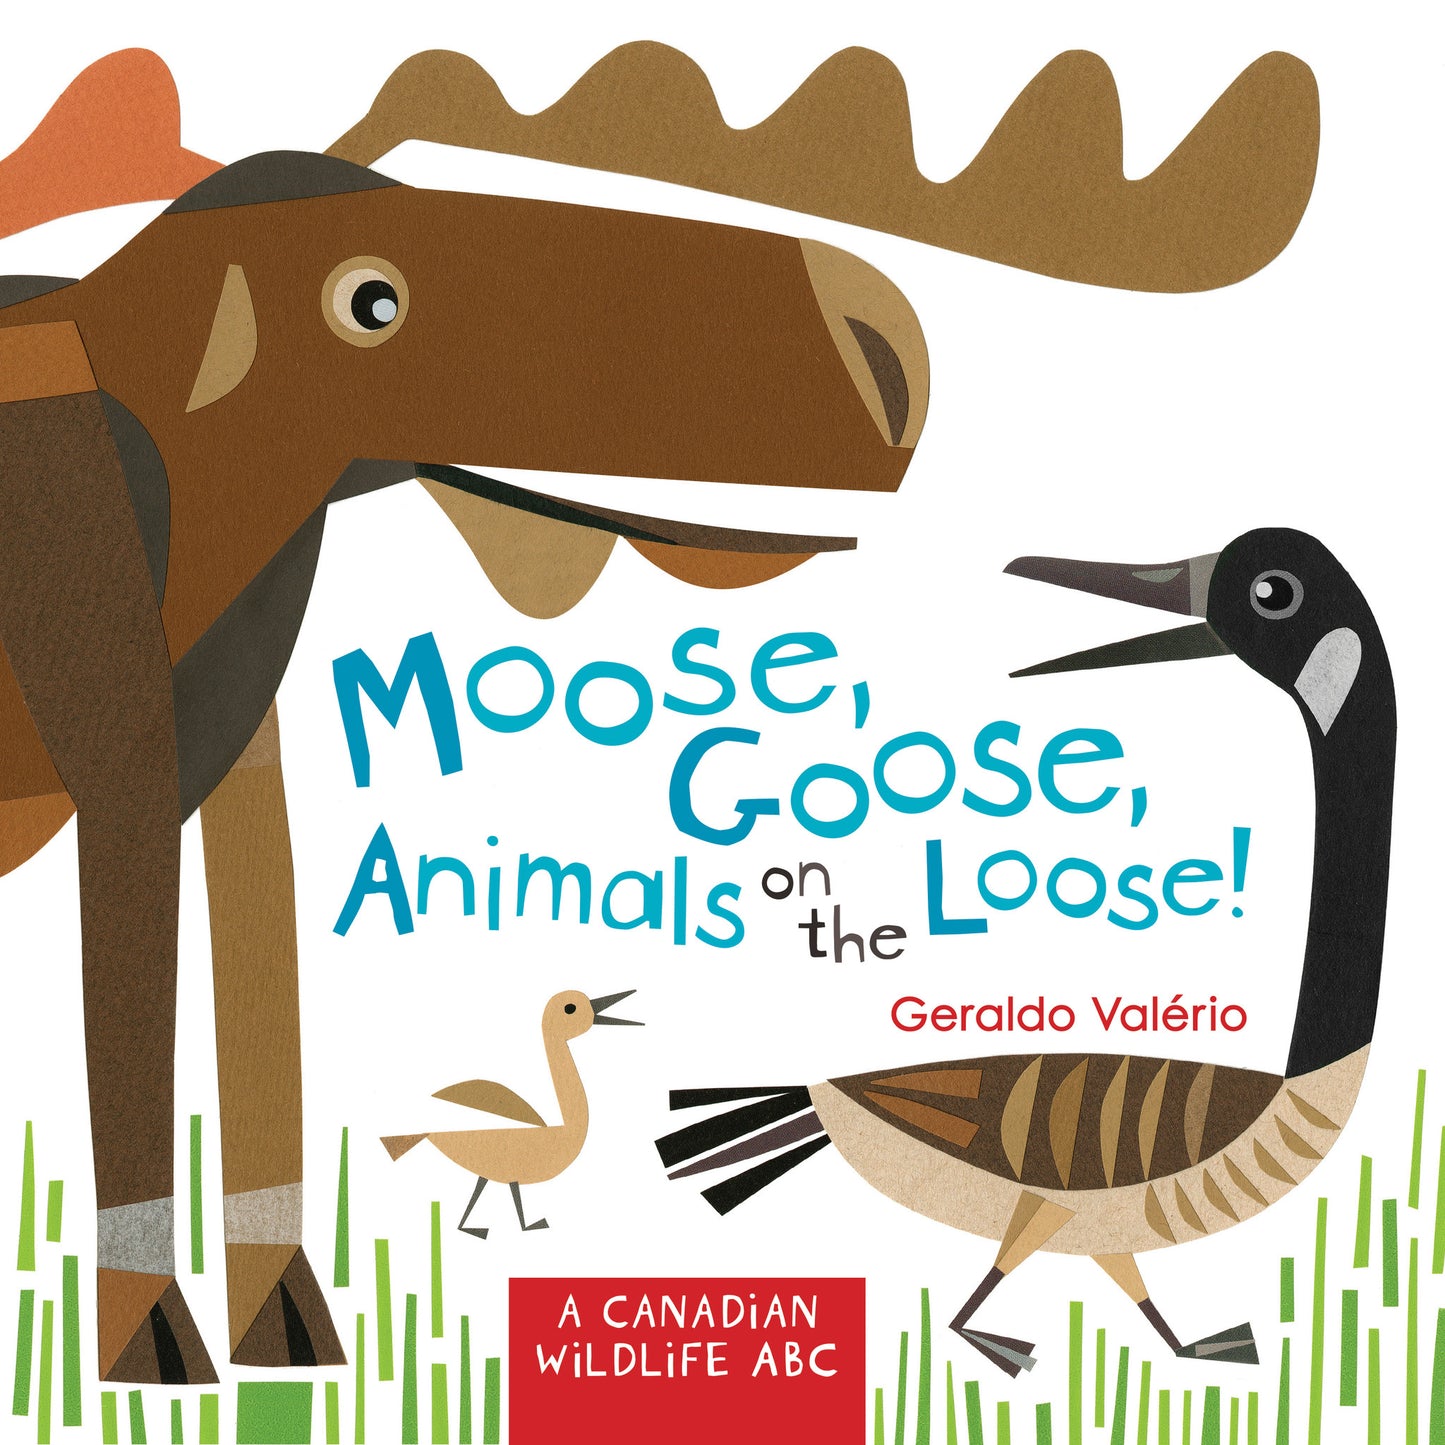 Moose, Goose, Animals on the Loose! - owlkids-us